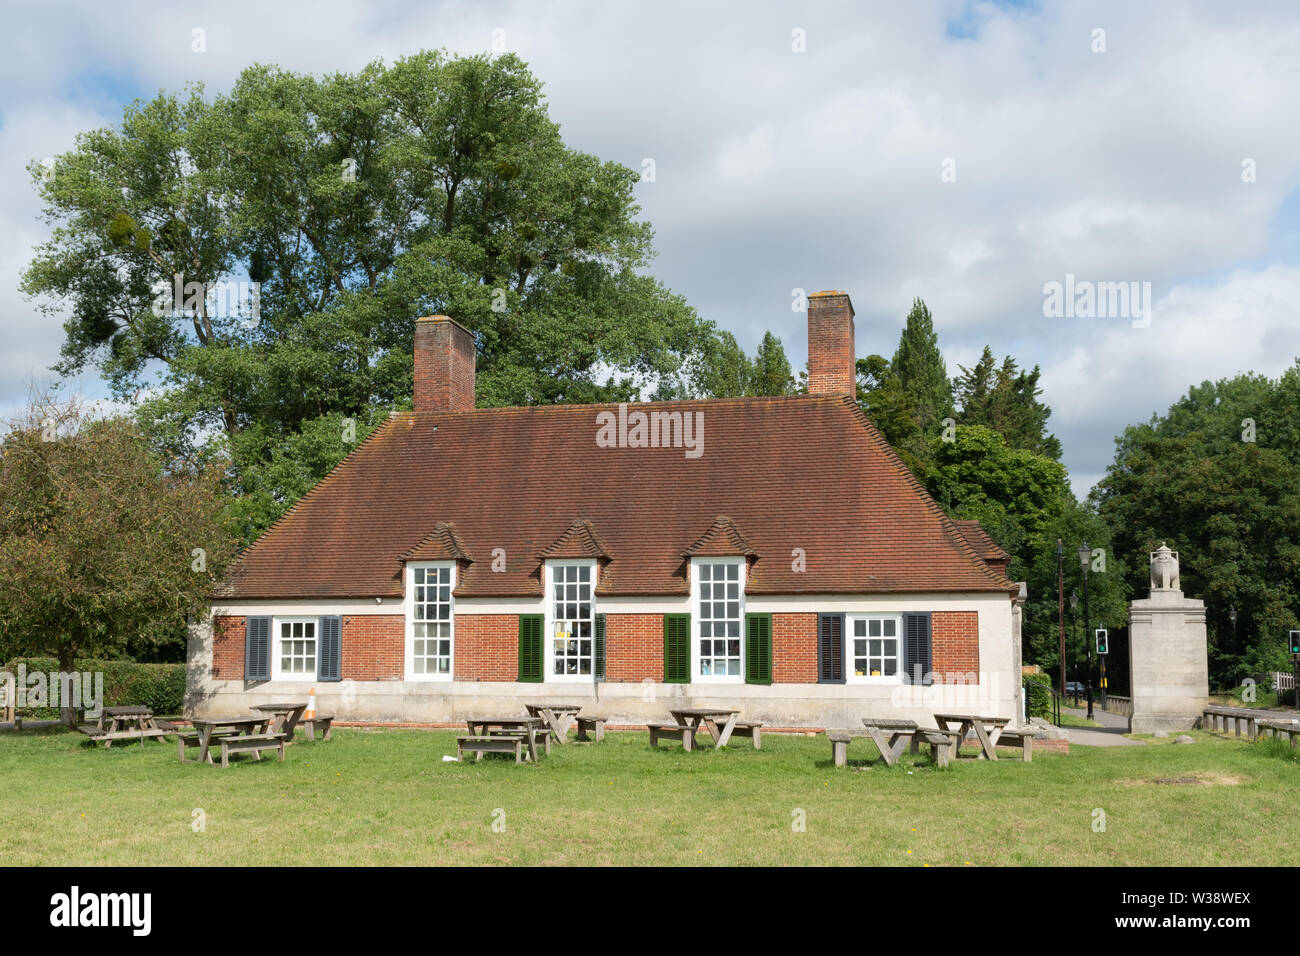 Fairhaven Memorial Lodge designed by Sir Edwin Lutyens at the Magna Carta freedom meadow in Runnymede, Surrey, UK Stock Photo